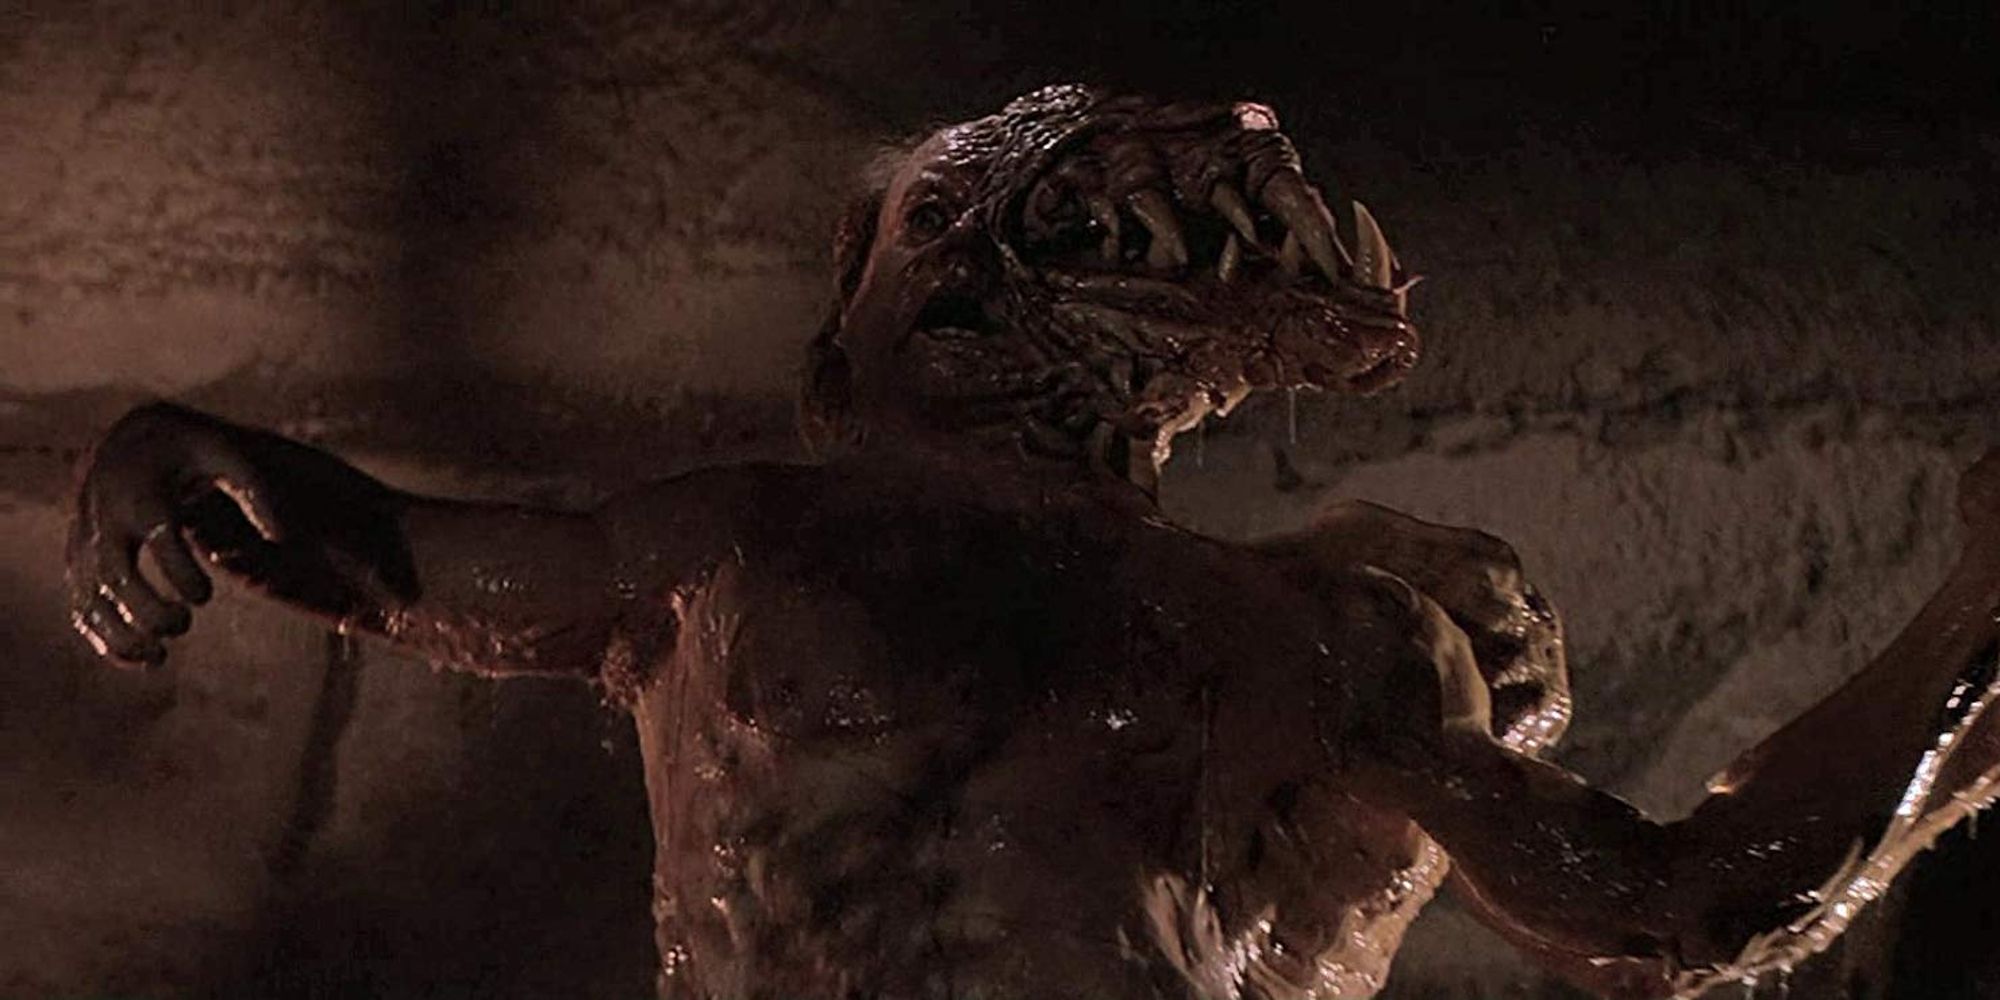 Blair-Thing in its final form in John Carpenter's The Thing